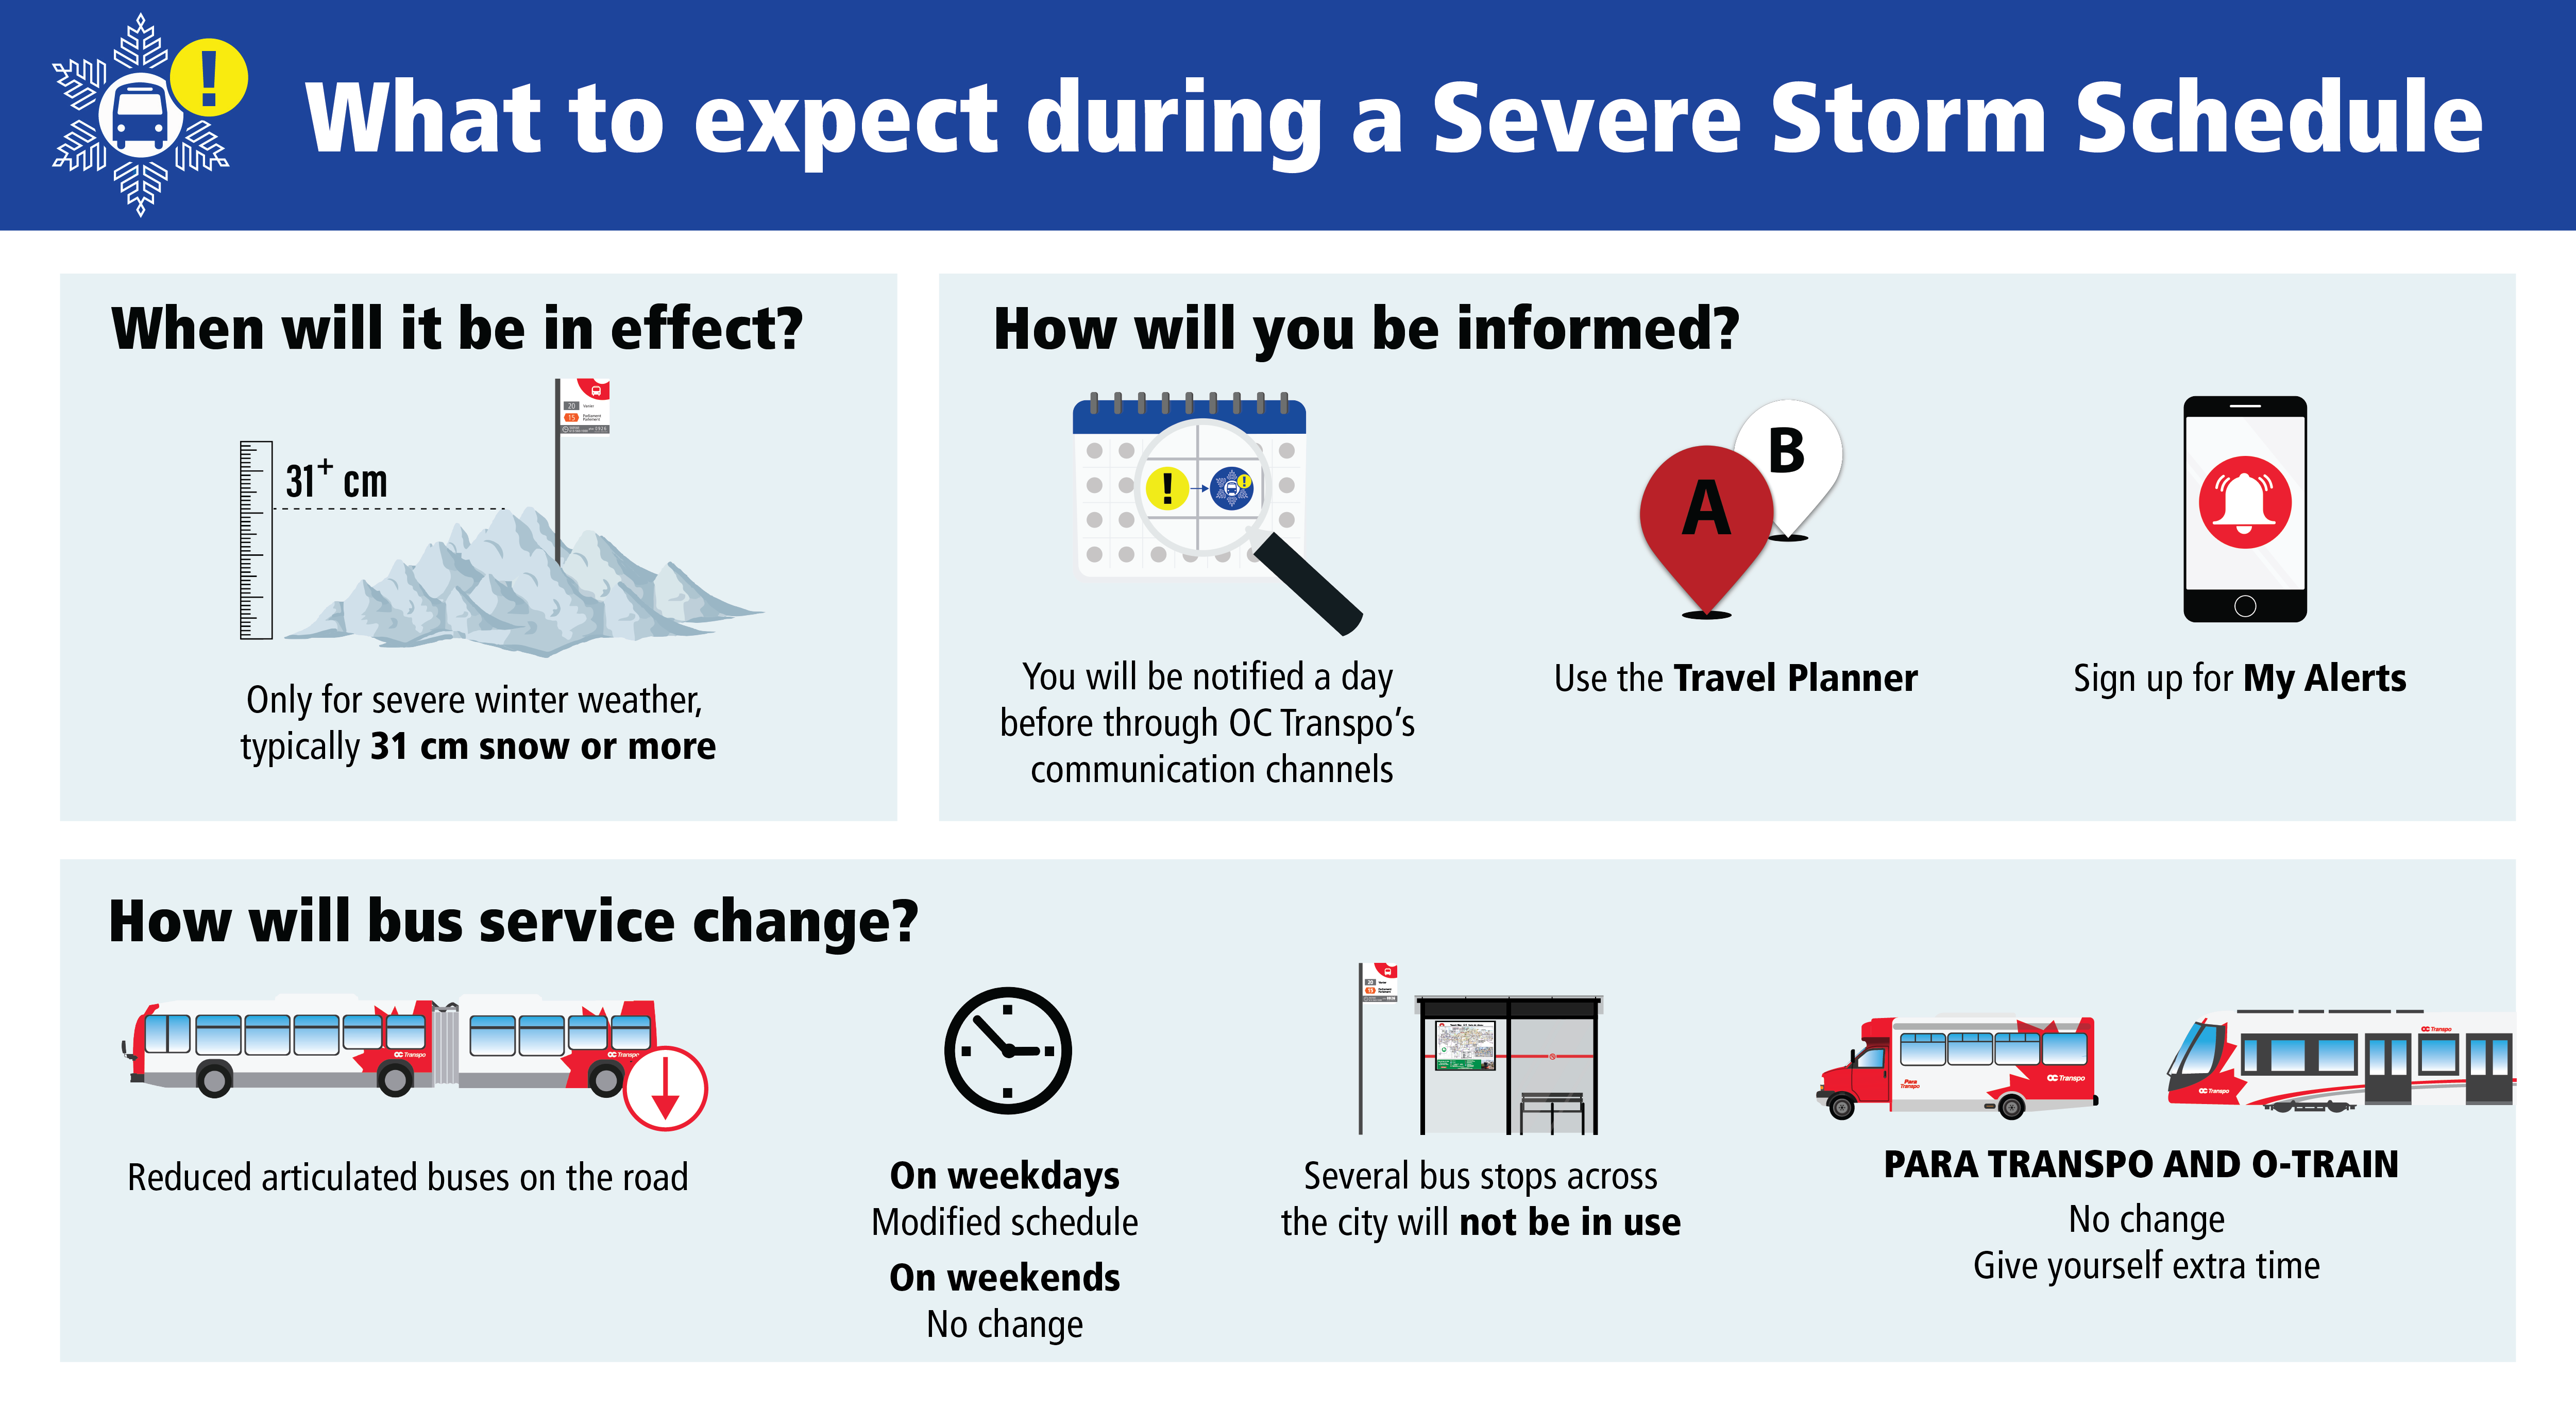 Severe Storm Schedule infographic.